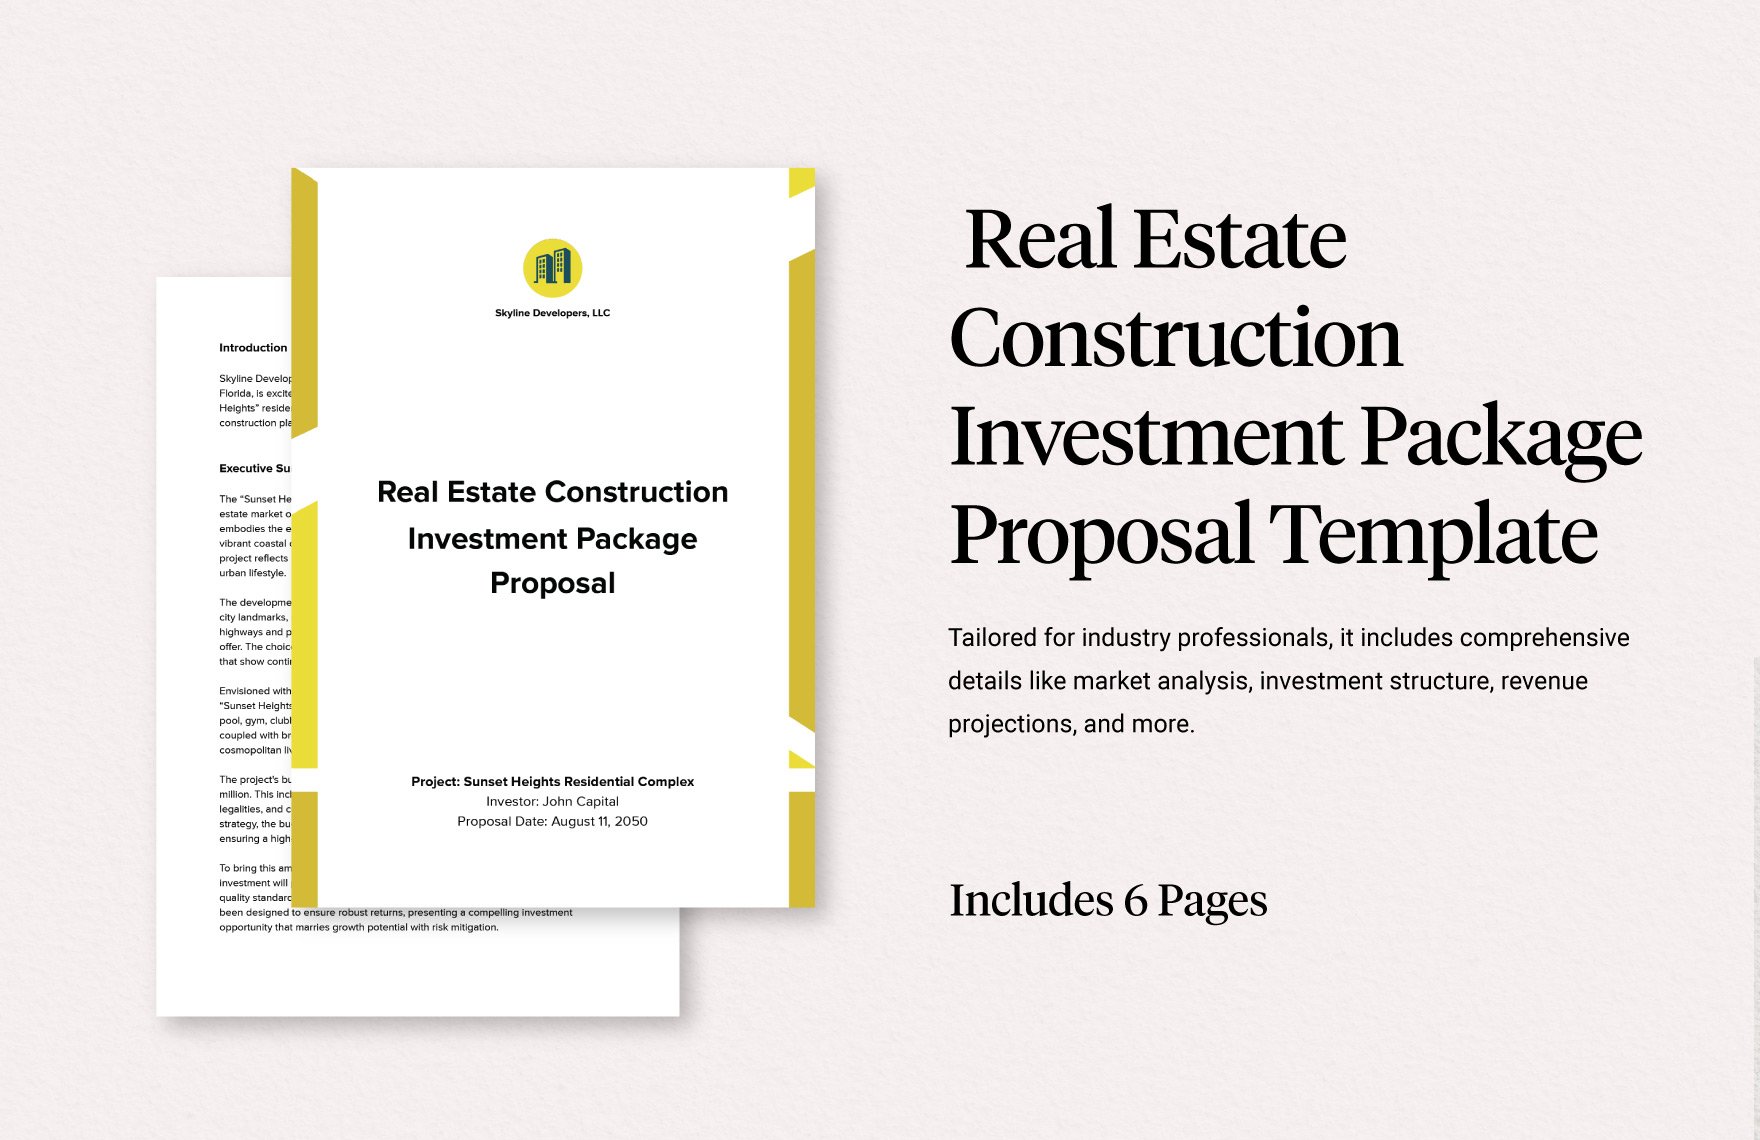 Real Estate Proposal Template in PDF